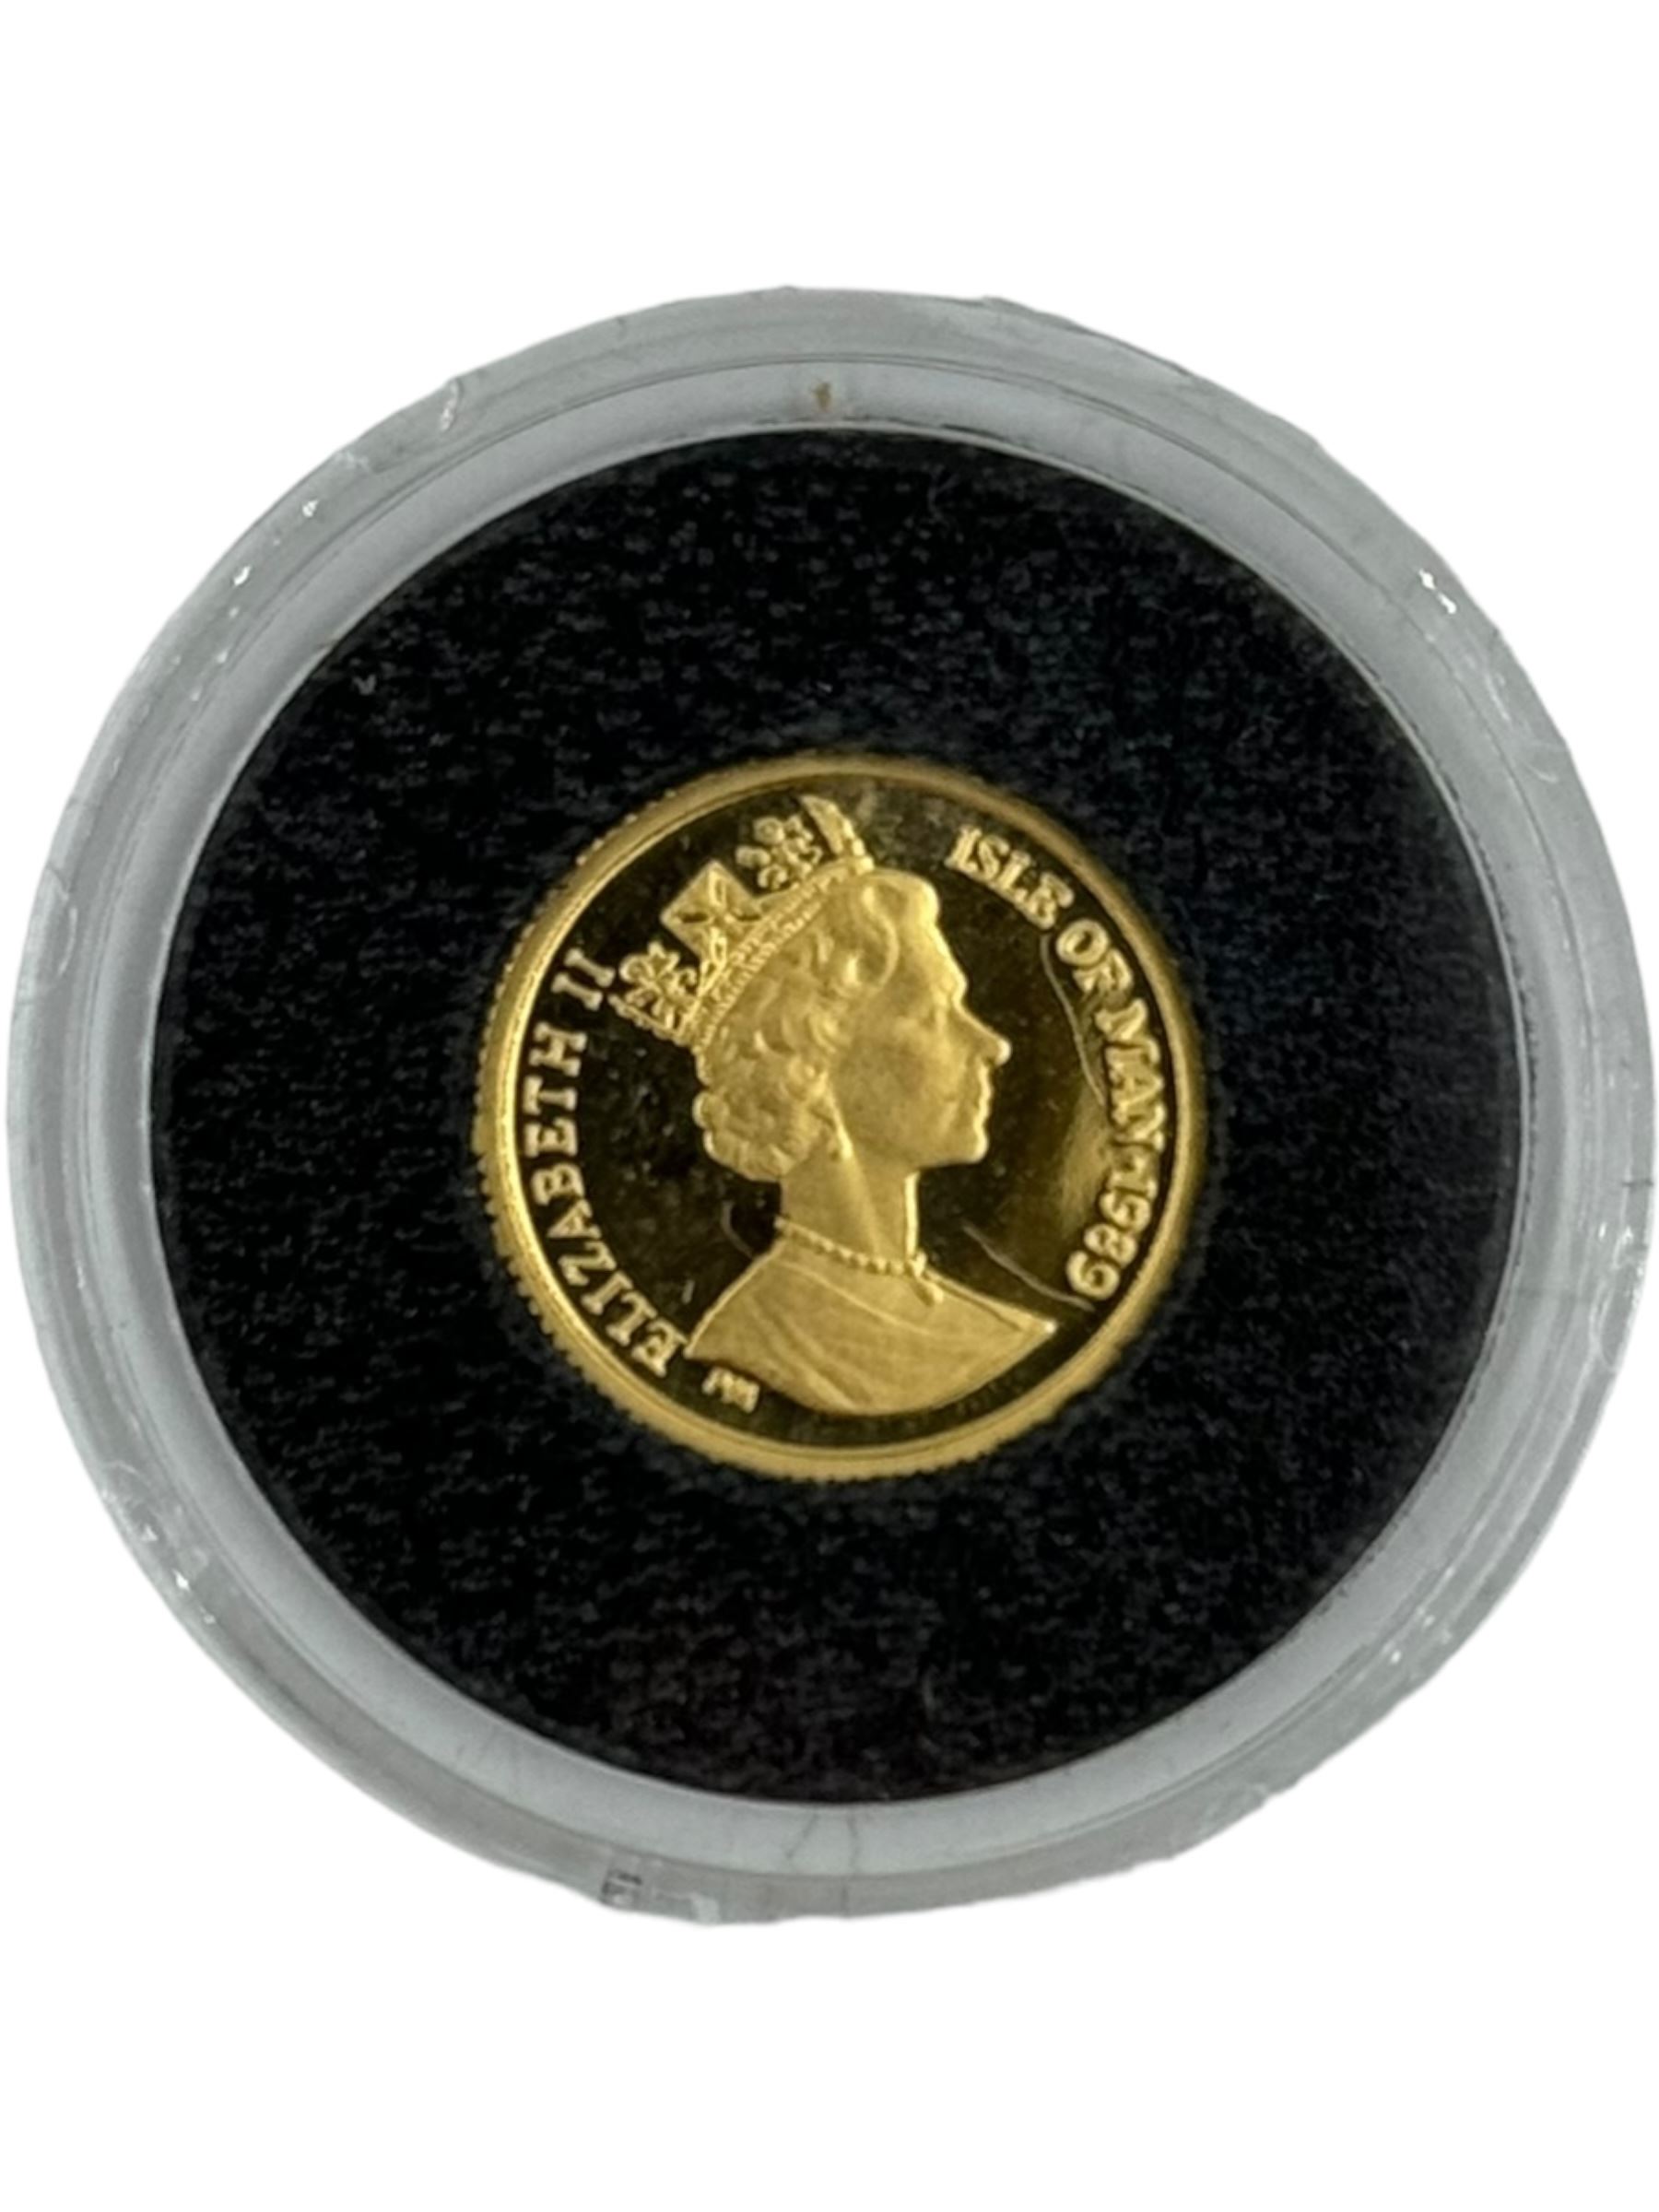 Four one twenty-fifth of an ounce 24 carat gold coins - Image 8 of 9